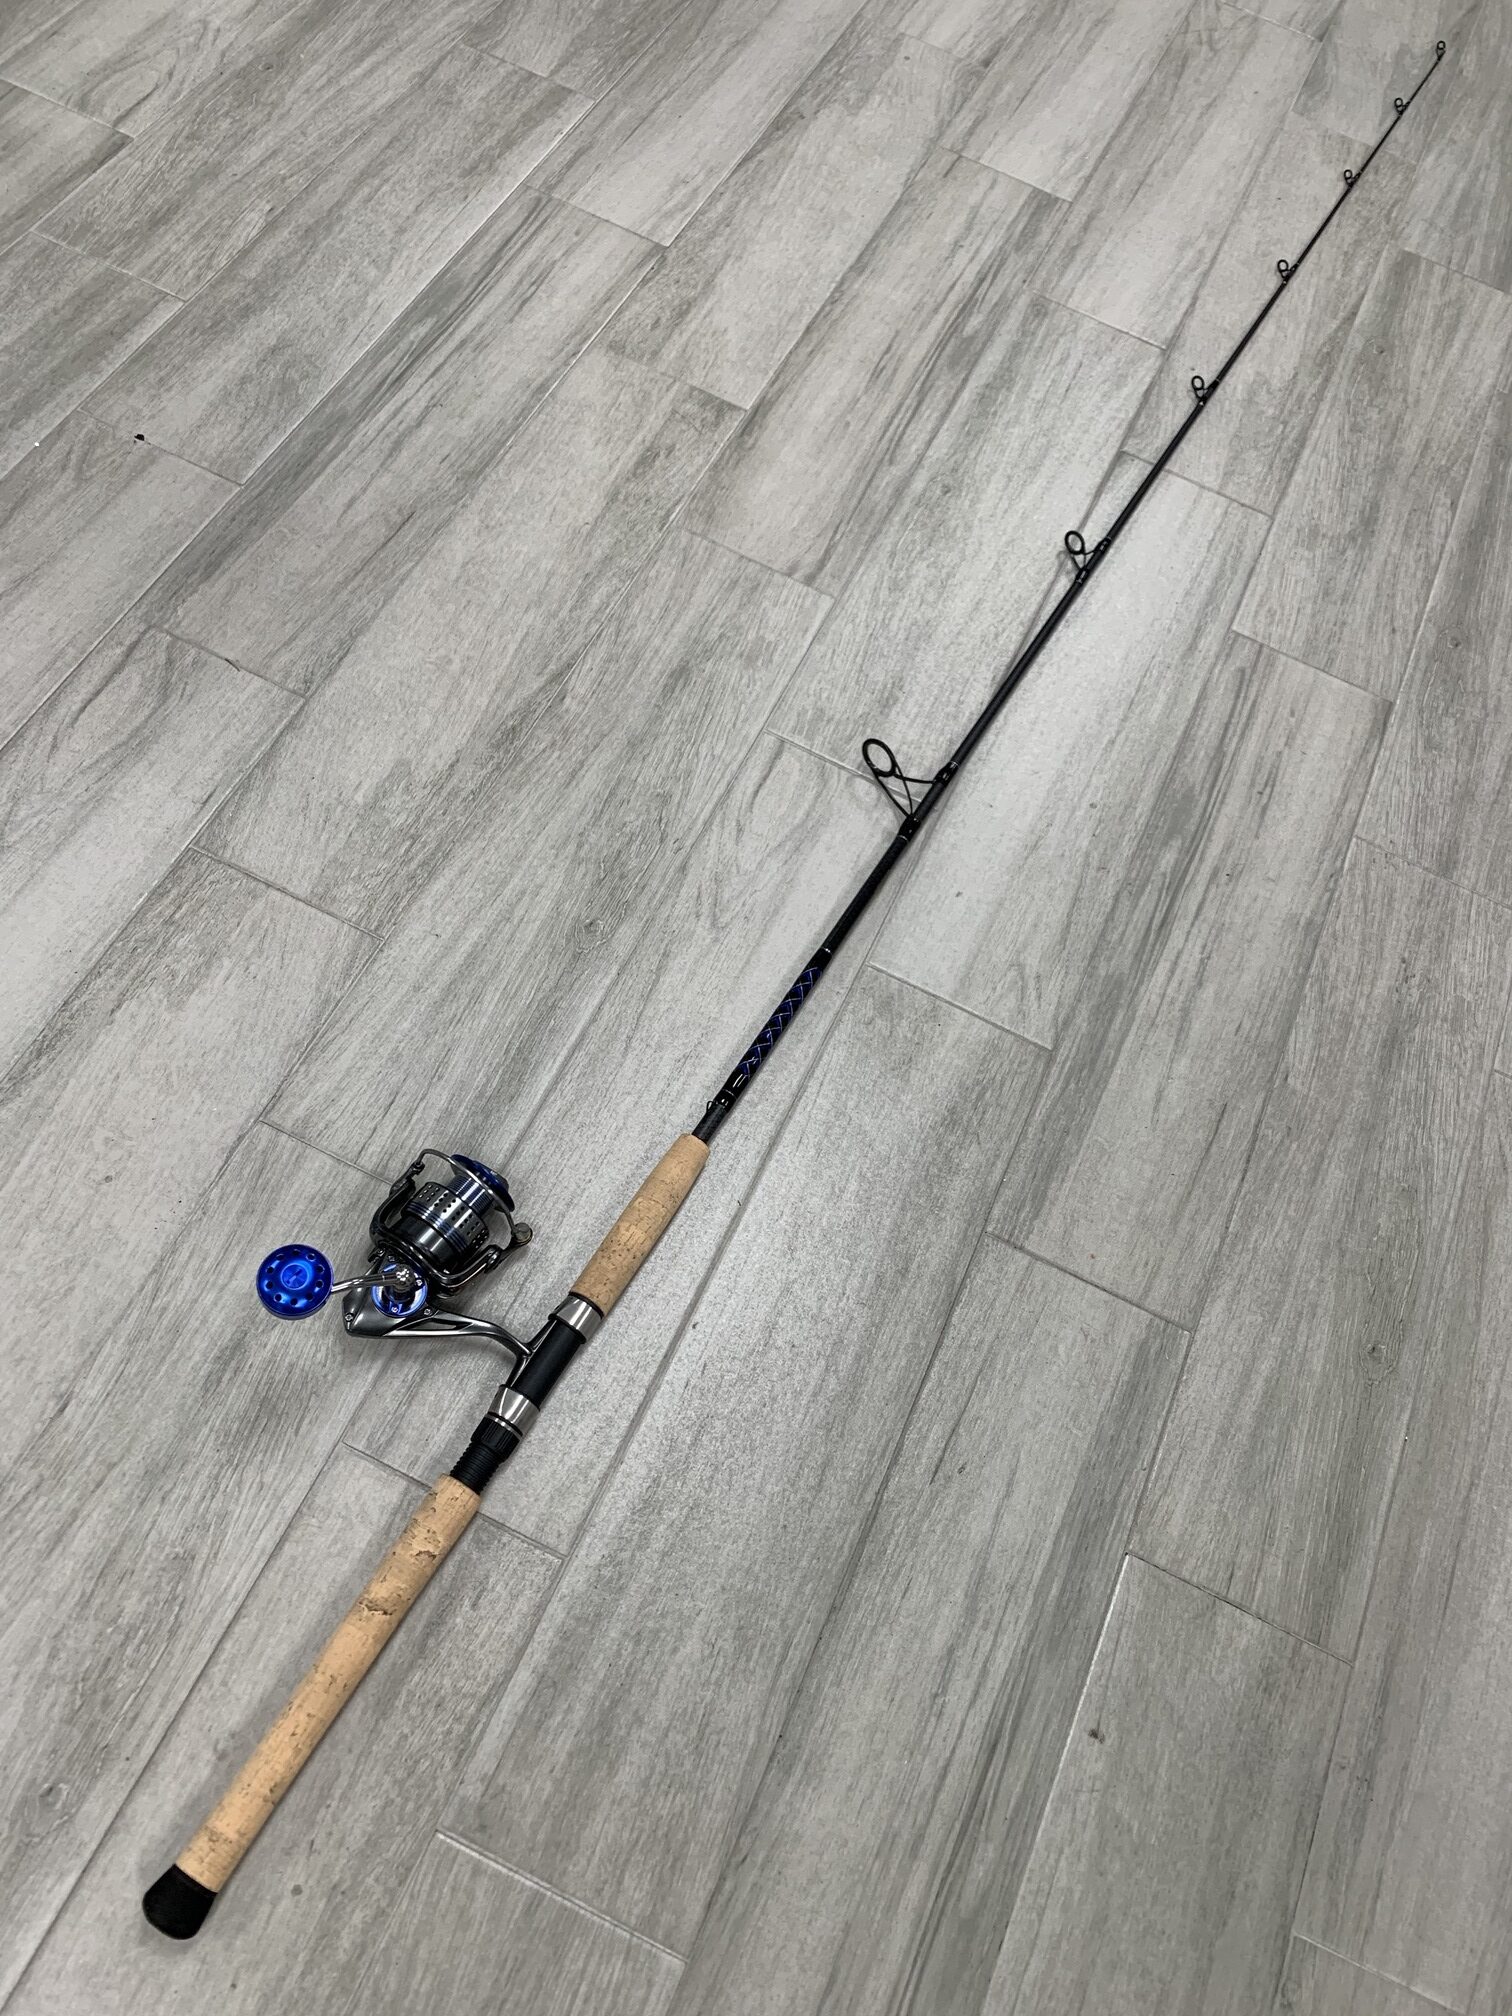 7′ 8-17# Inshore Carbon Fiber Spinning Rod with Canyon 3500